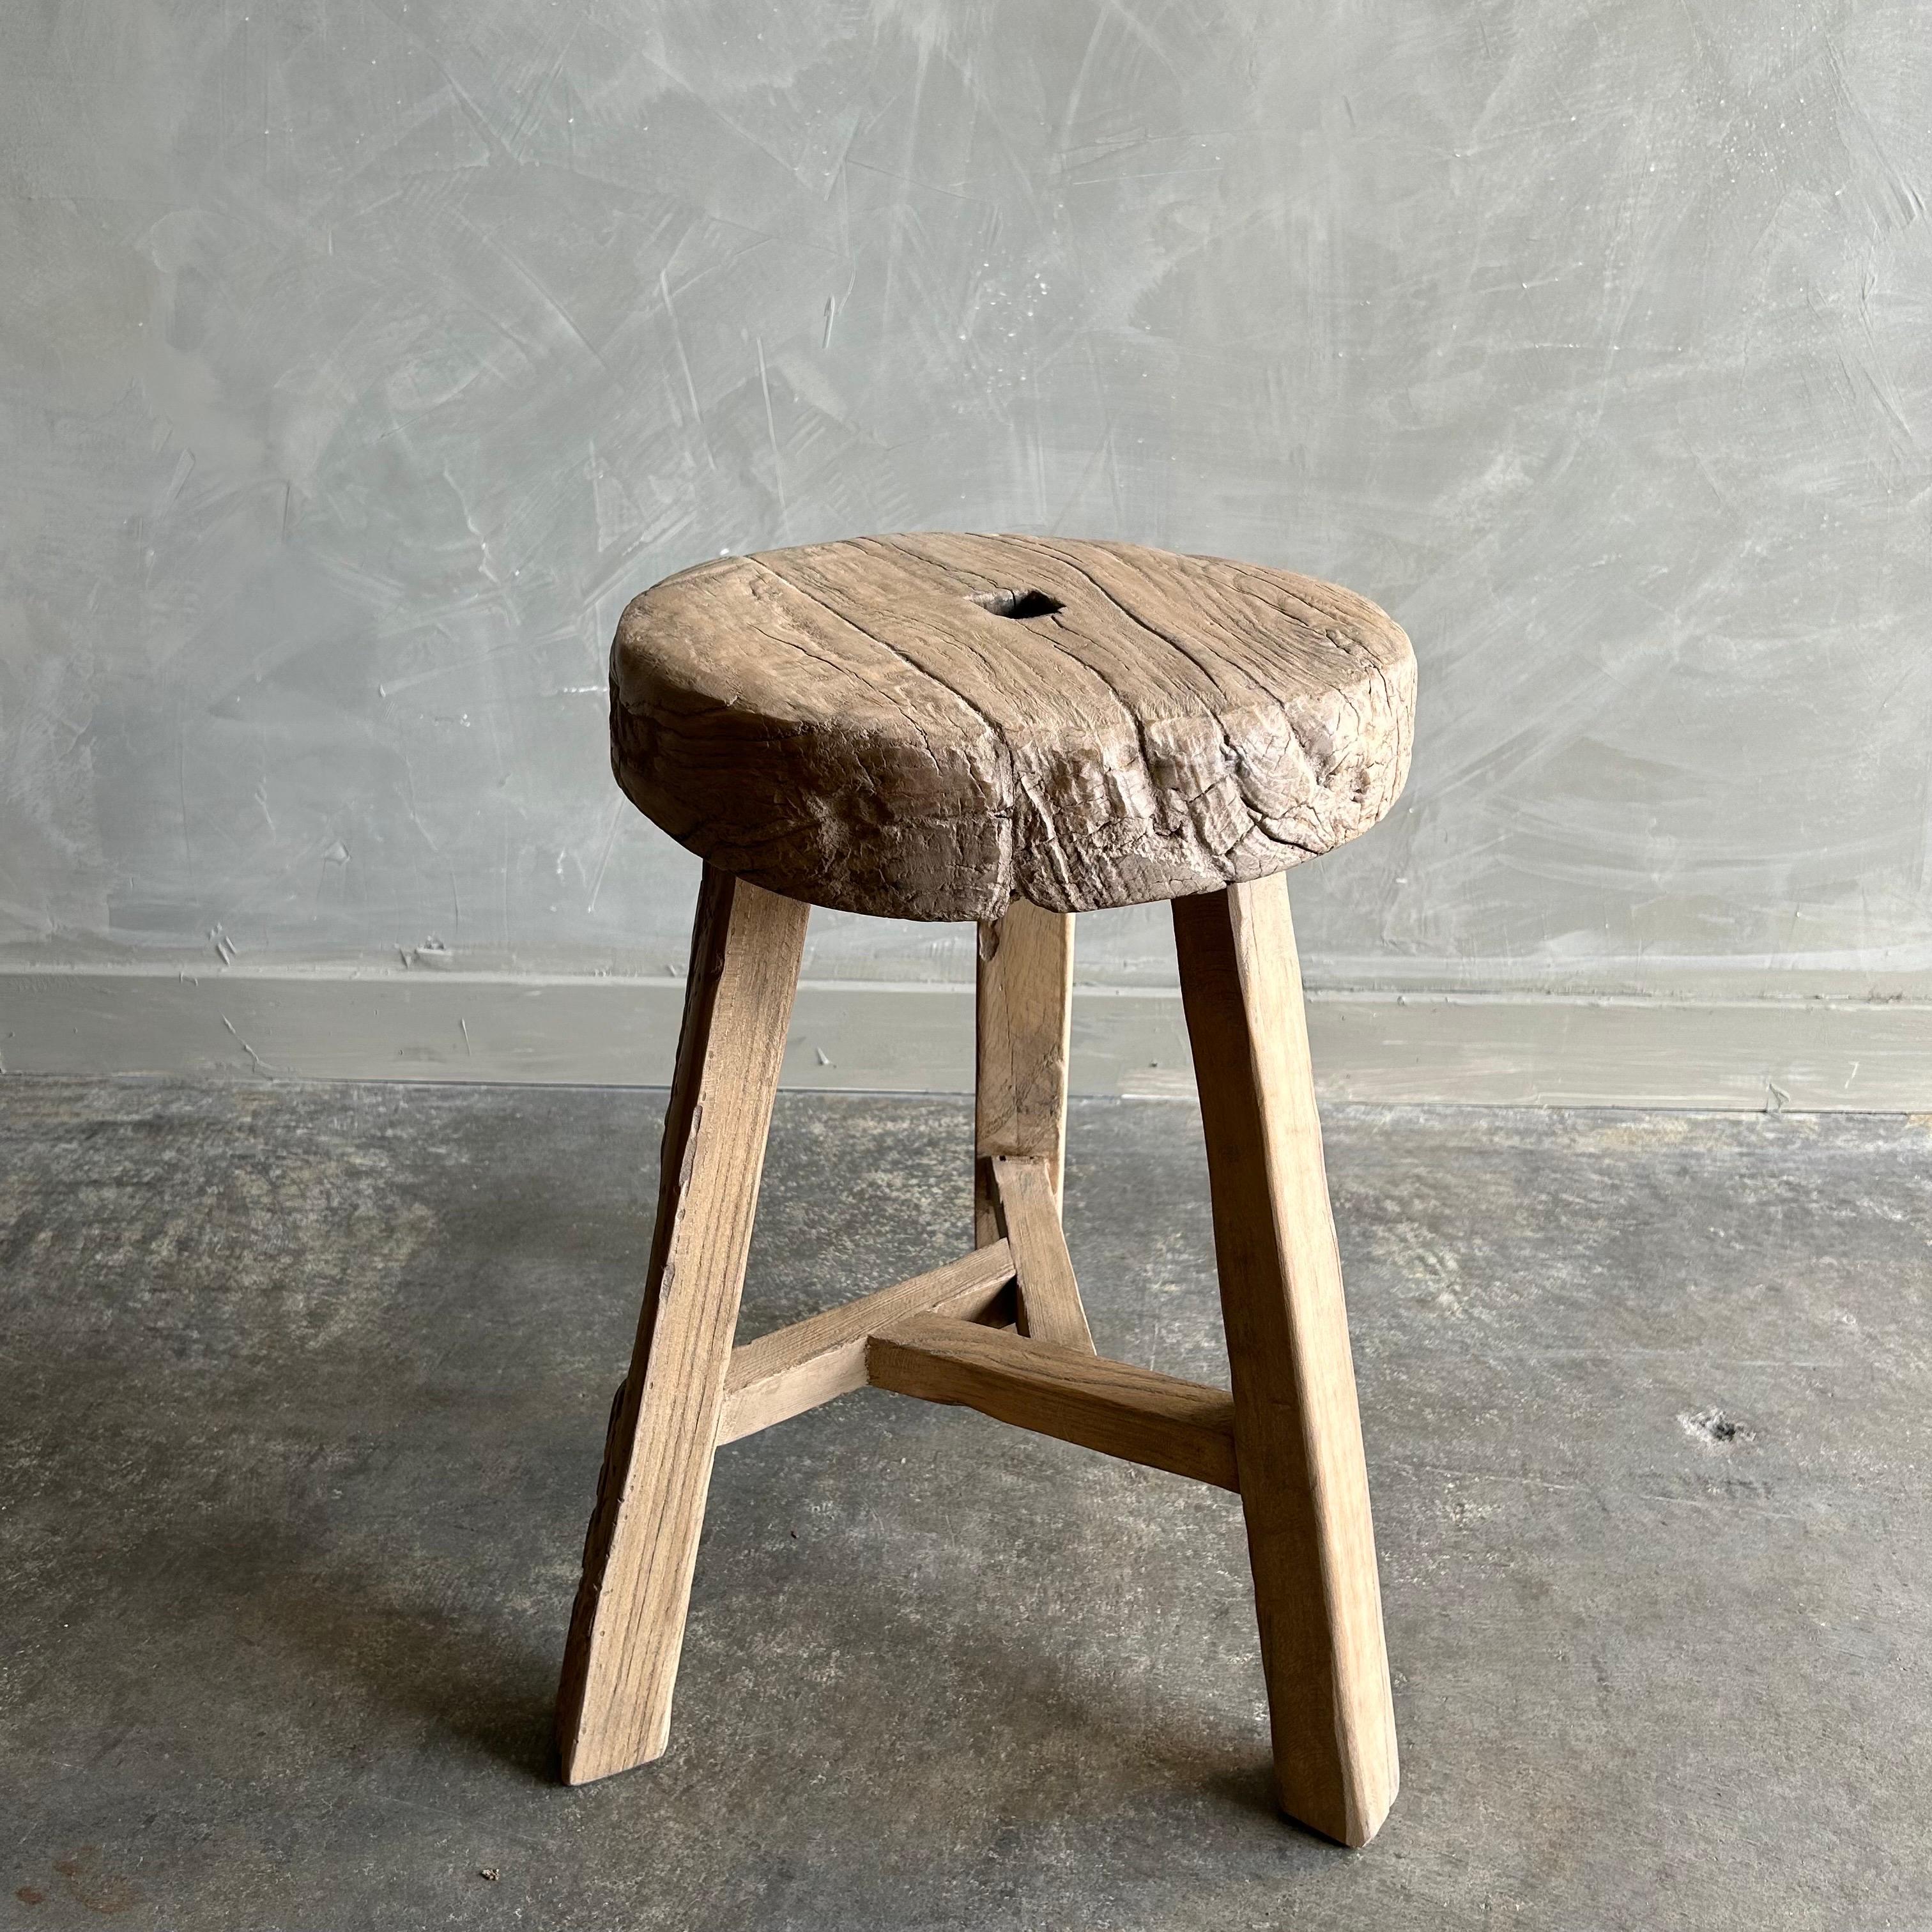 Vintage wheel side table. This vintage elm wood wheel table is finished with medium natural. The stool / table is solid and sturdy ready for everyday use. Use as a side table, stool, powder room to add vintage style to your home. One of a kind